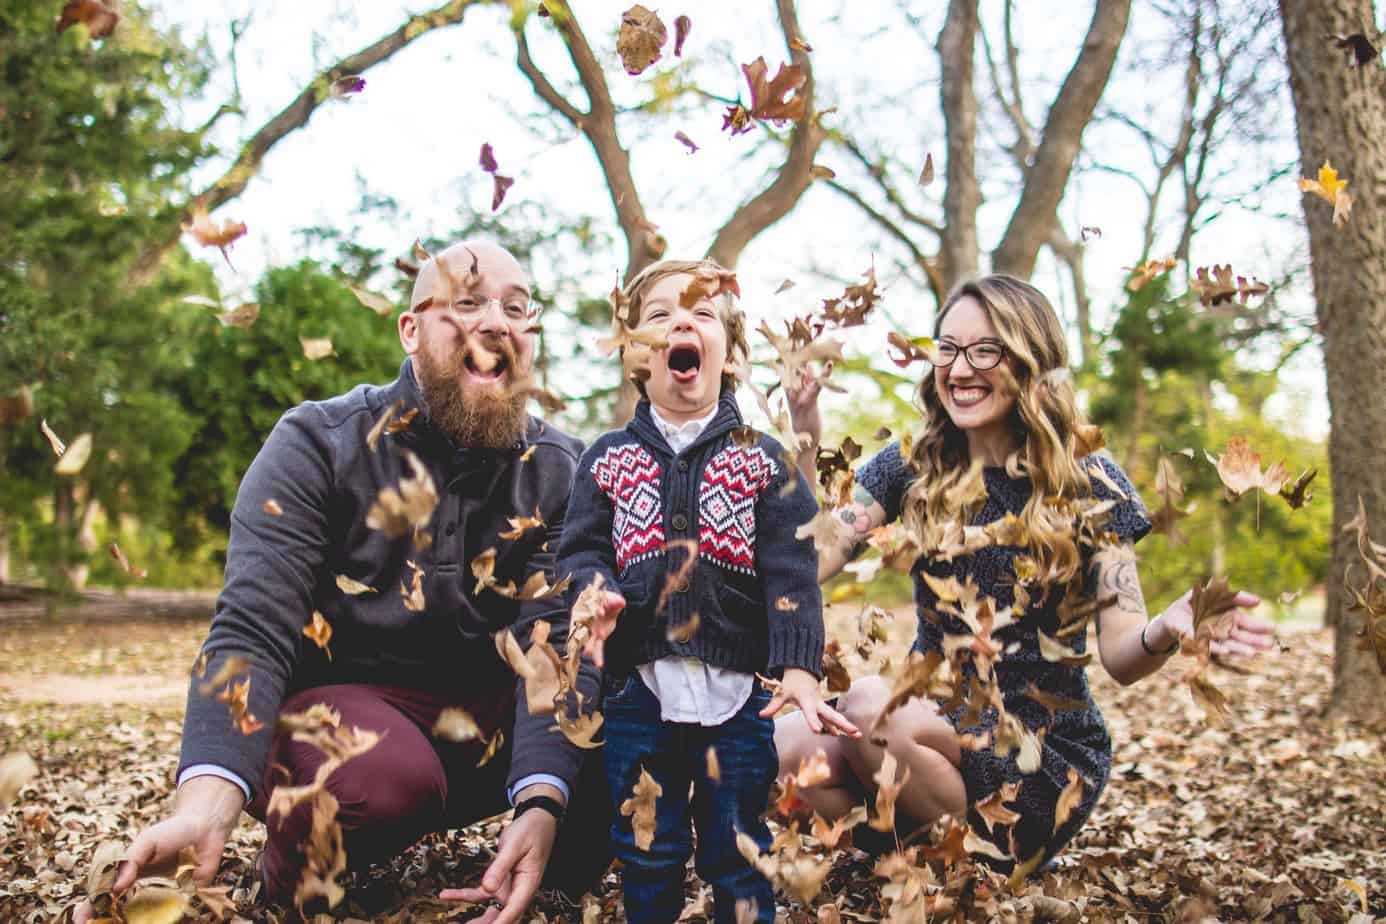 diy portrait ideas outdoors - family fall photoshoot with leaves in the air